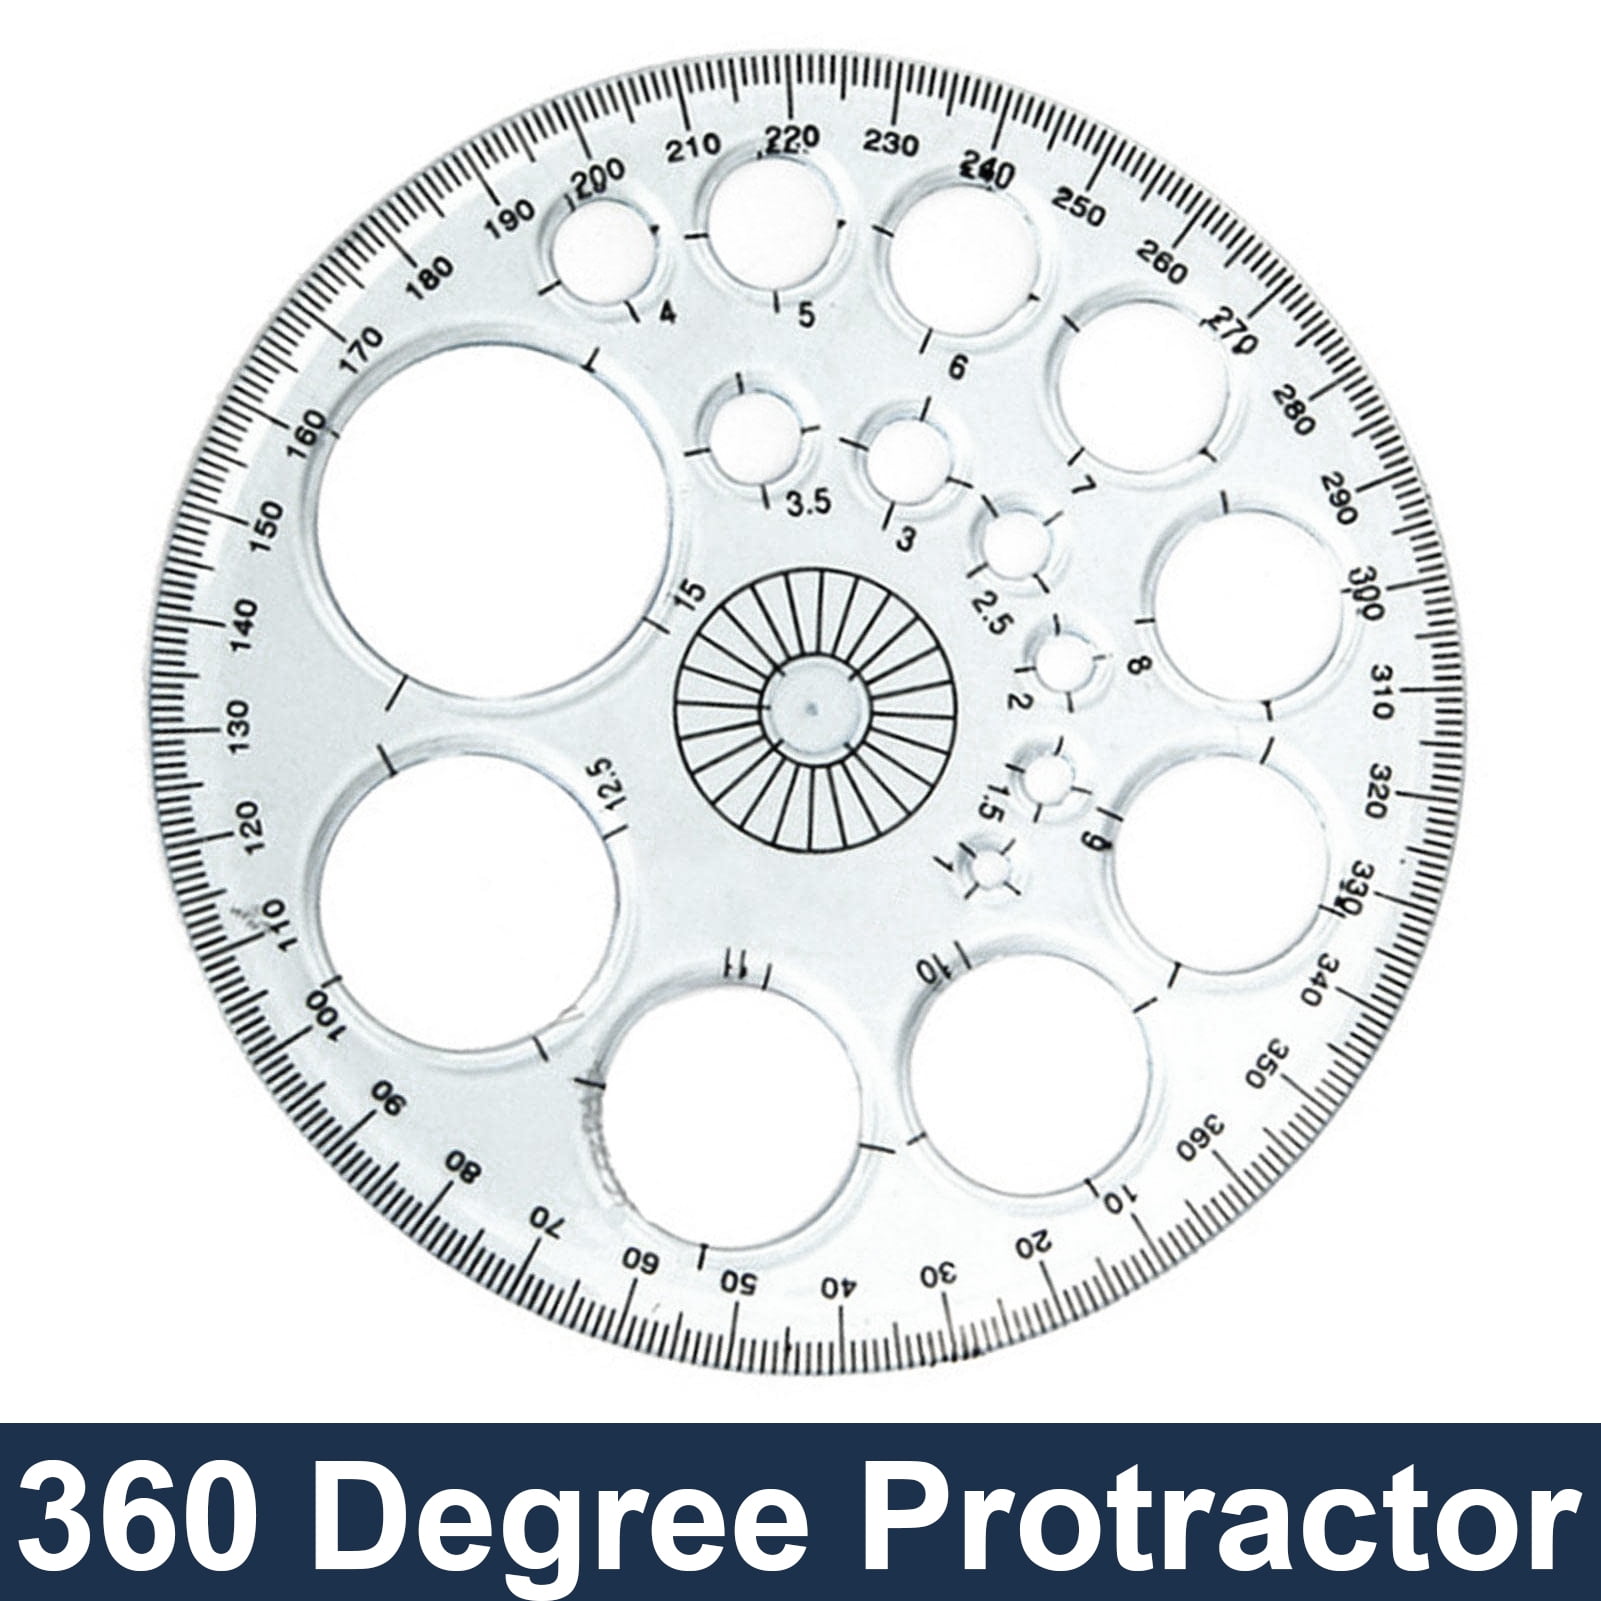 1Pc 360 Degree Protractor Round Drafting Ruler Measuring Tool School Supplies 